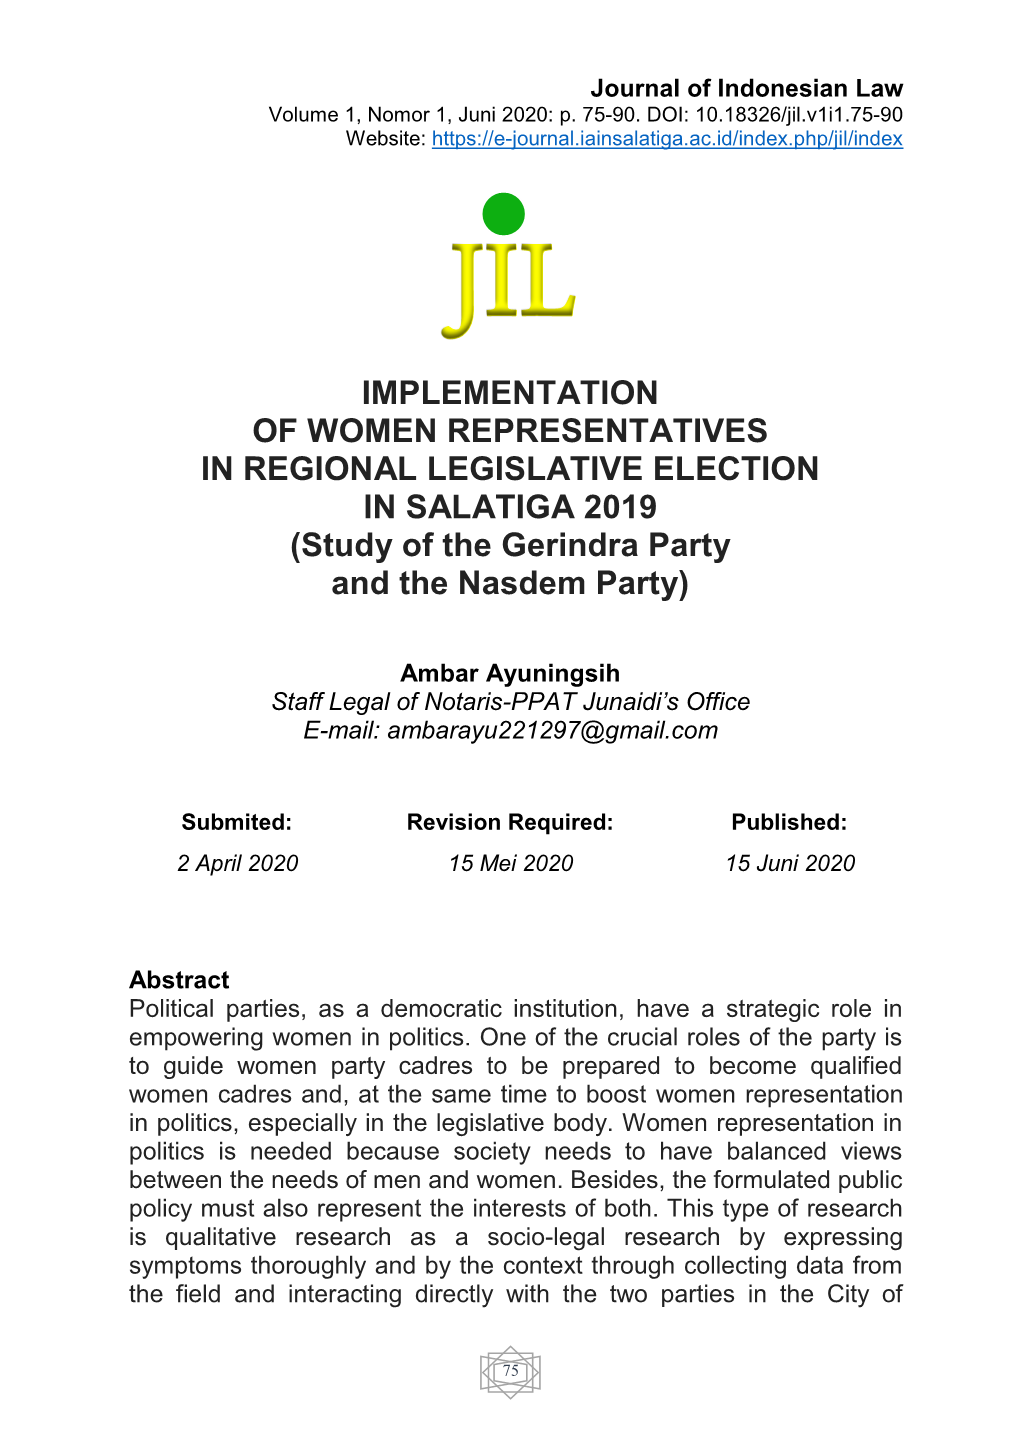 IMPLEMENTATION of WOMEN REPRESENTATIVES in REGIONAL LEGISLATIVE ELECTION in SALATIGA 2019 (Study of the Gerindra Party and the Nasdem Party)